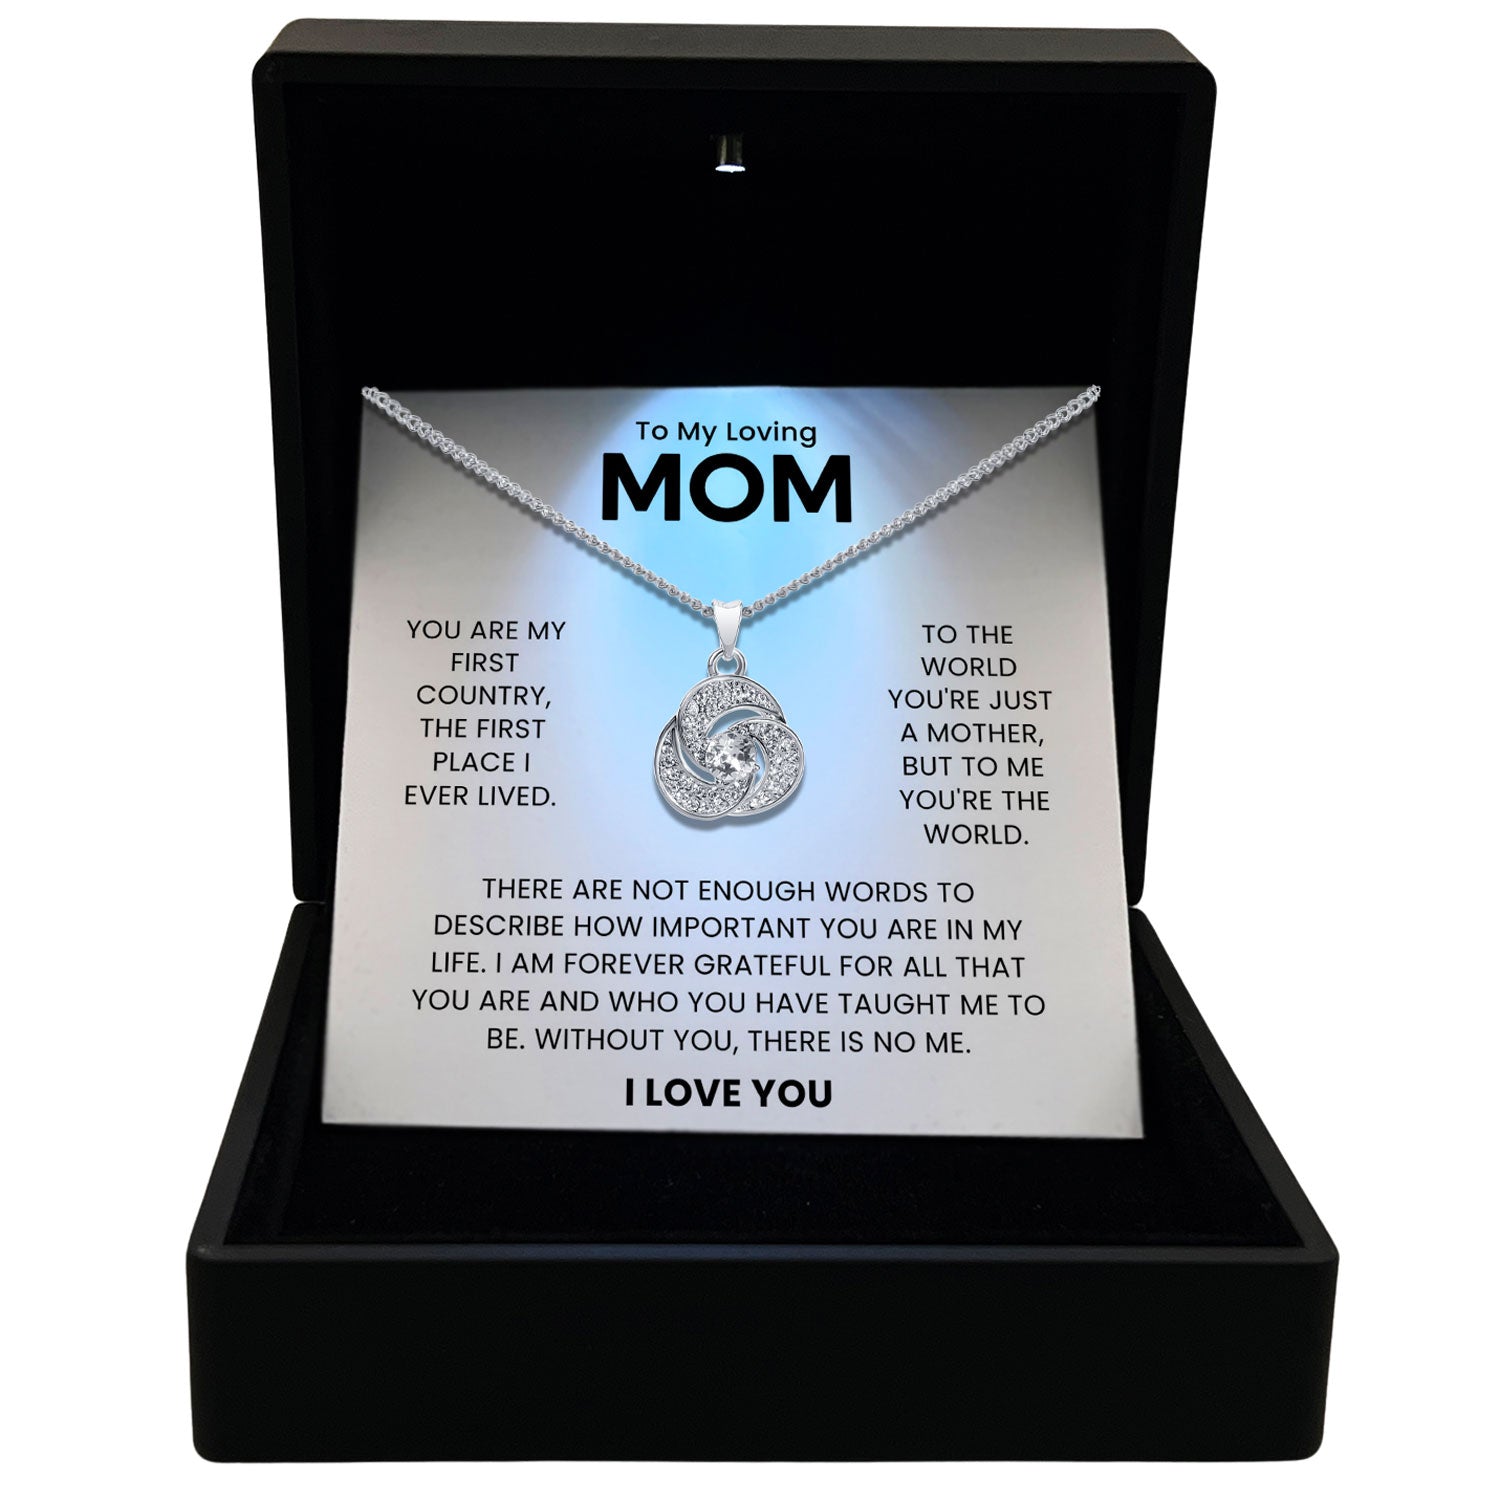 To My Loving Mom - To Me You're The World - Tryndi Love Knot Necklace